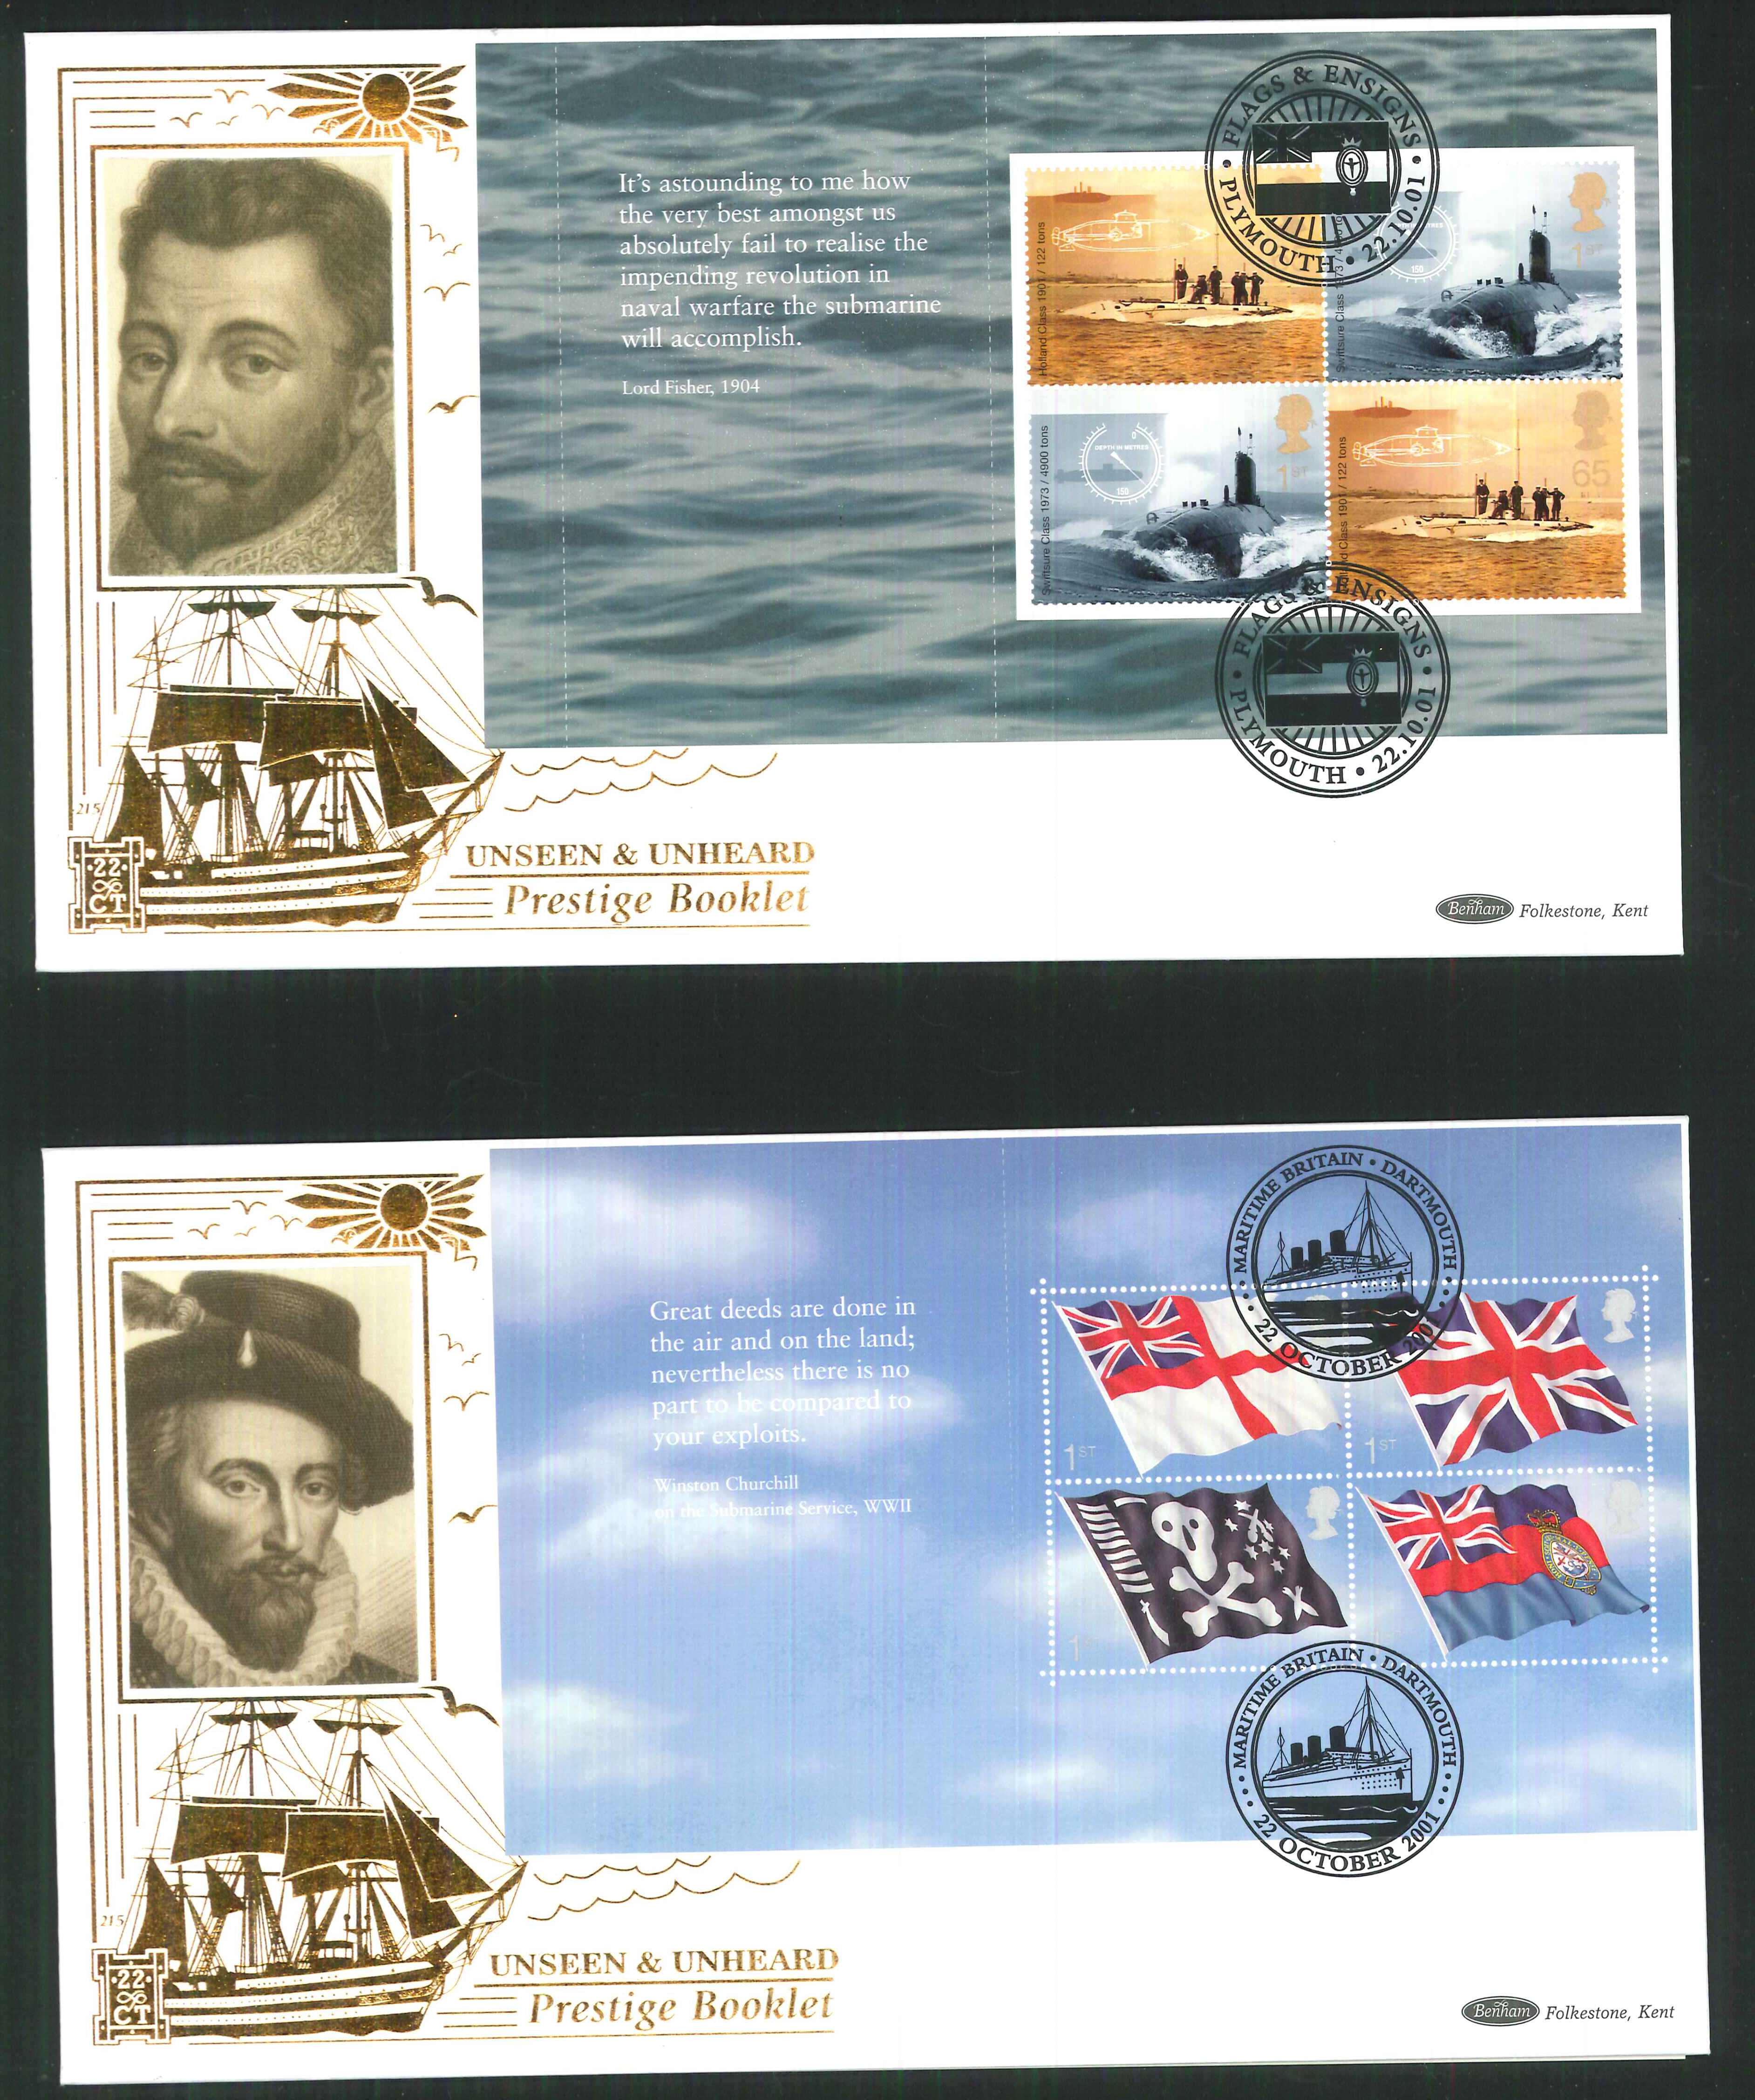 2001 - Flags & Ensigns PSB FDC Benham 22ct Gold 500 - Different Postmark